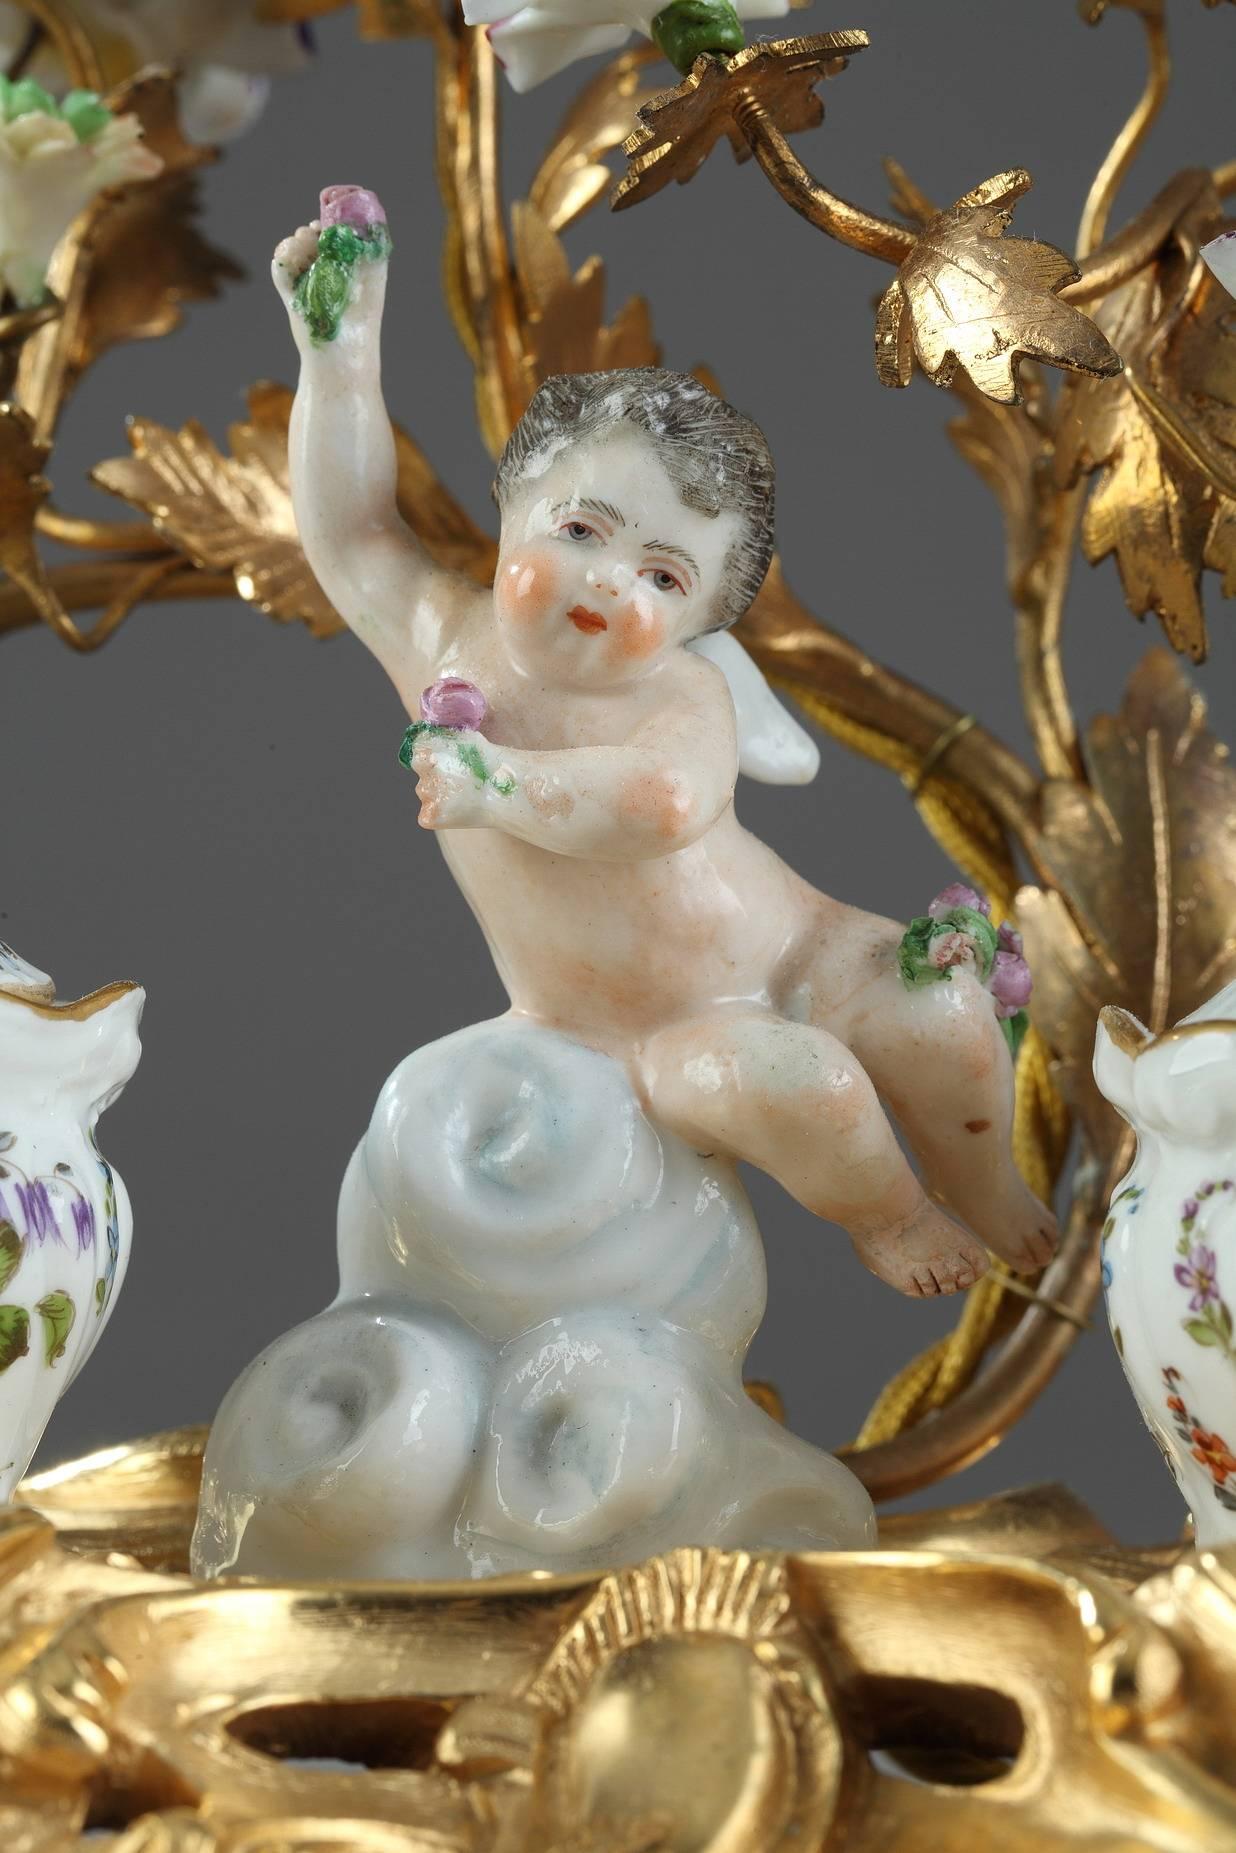 Late 19th century multicolored porcelain and ormolu inkwell in Meissen taste.
This piece is very representative of Louis XV style, with its rich decoration of multicolored flowers, ormolu branches, foliage and Rocaille motifs. A putto on a cloud